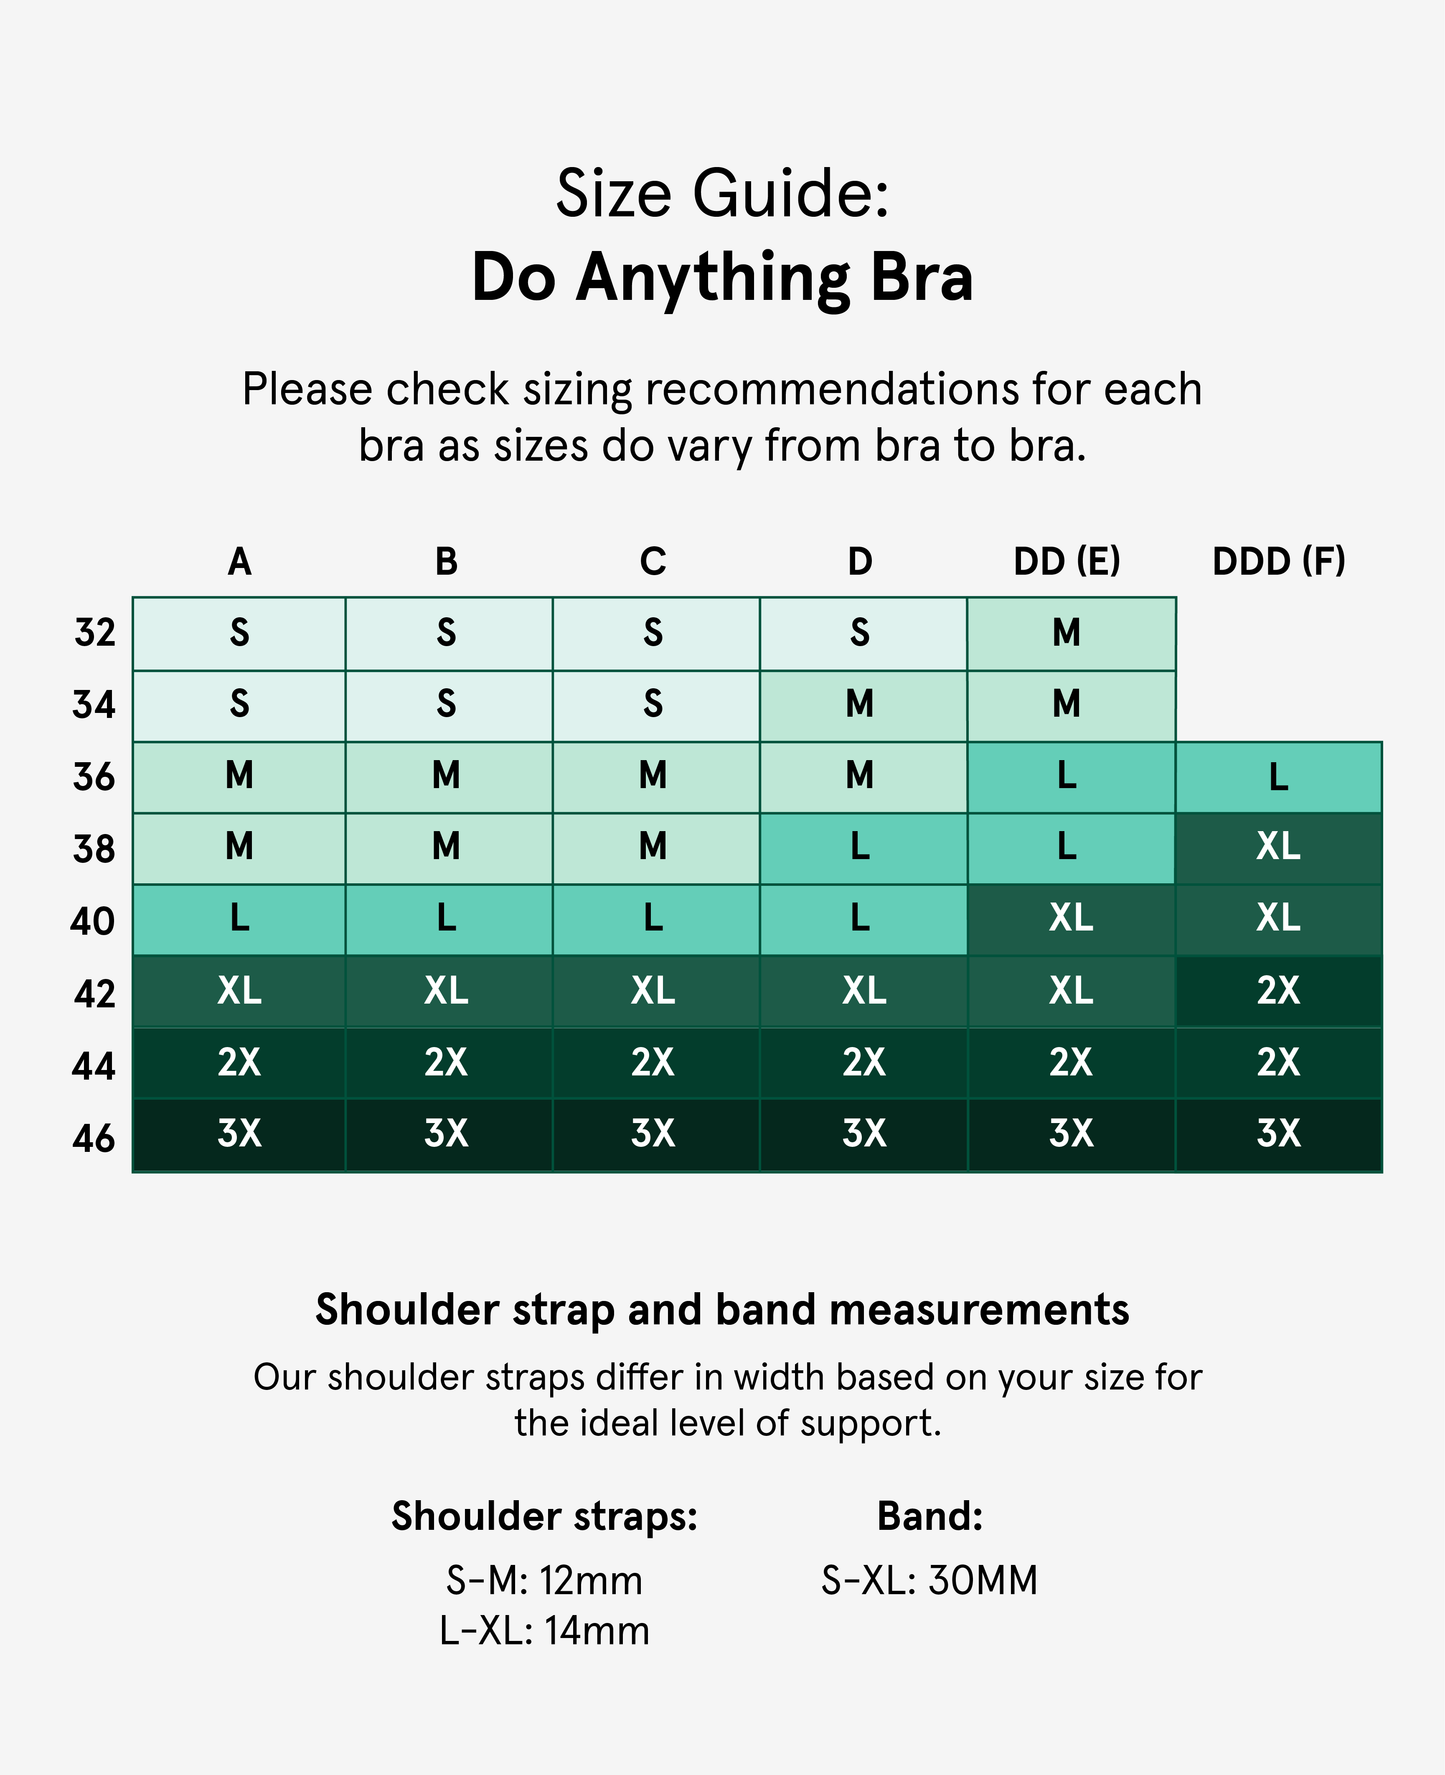 Please check sizing recommendations for each bra as sizes do vary from bra to bra.